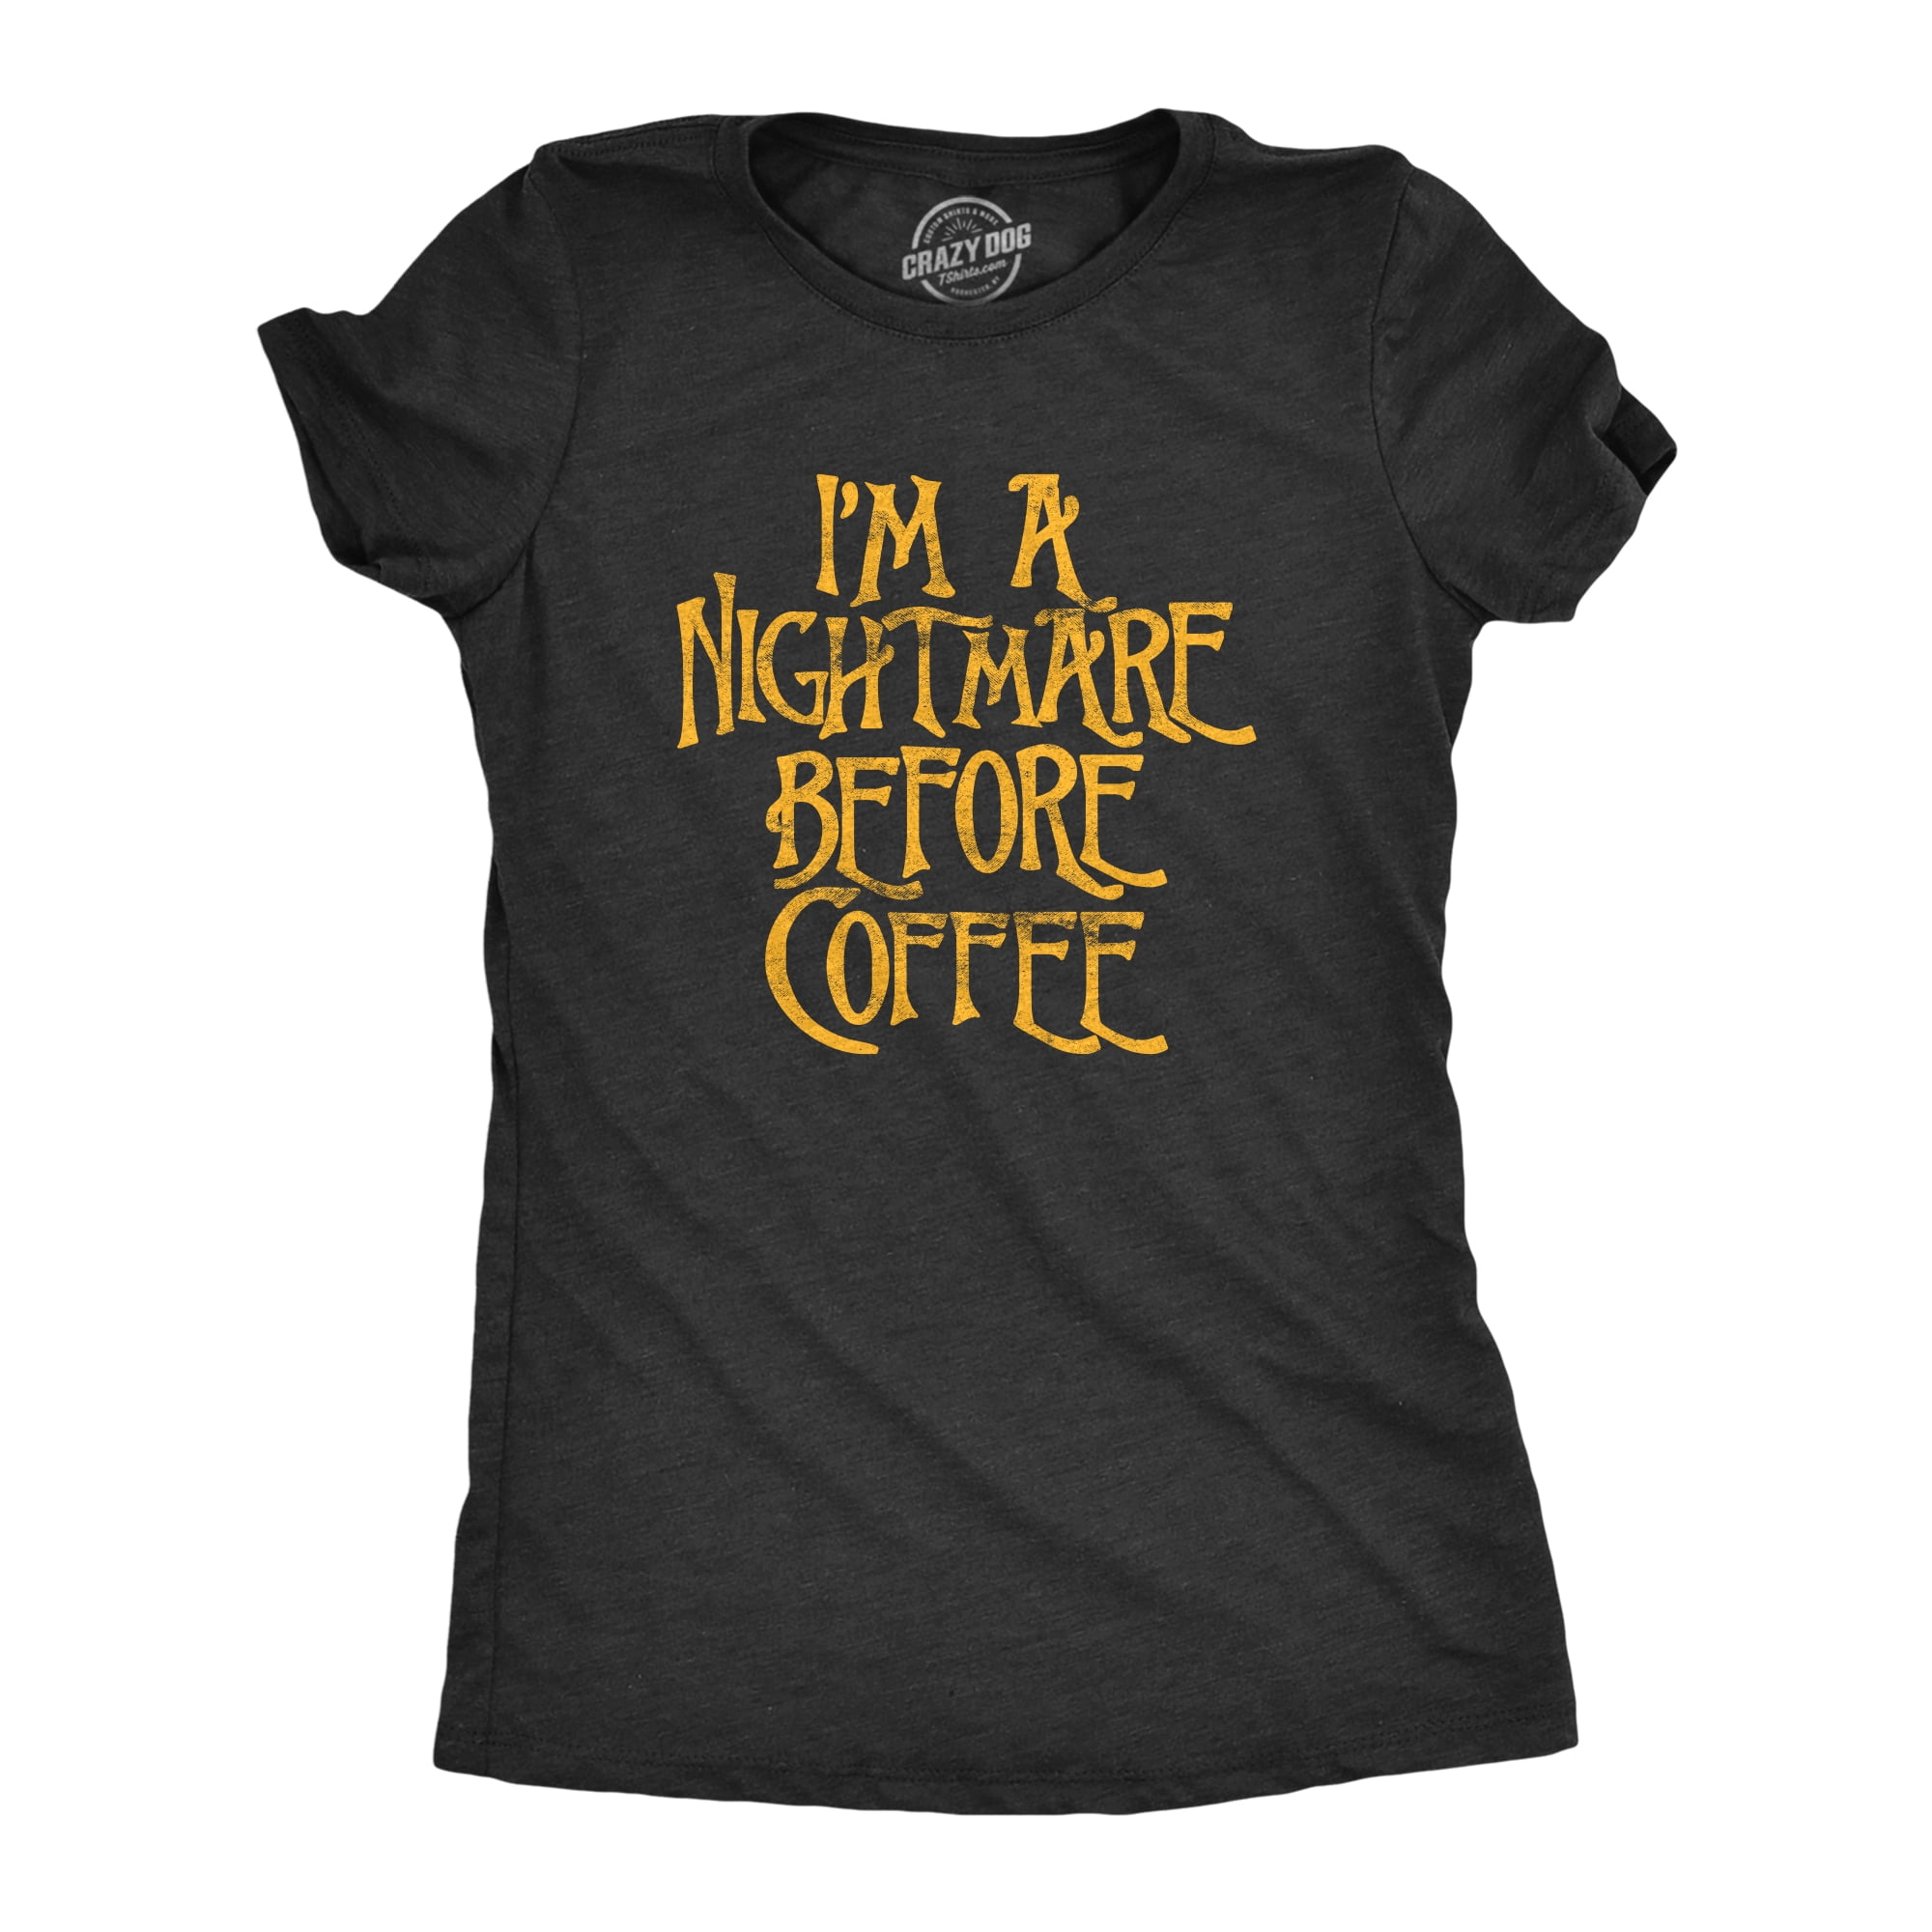 I'm A Nightmare Before Coffee Gothic Black White Vinyl Decal Sticker 